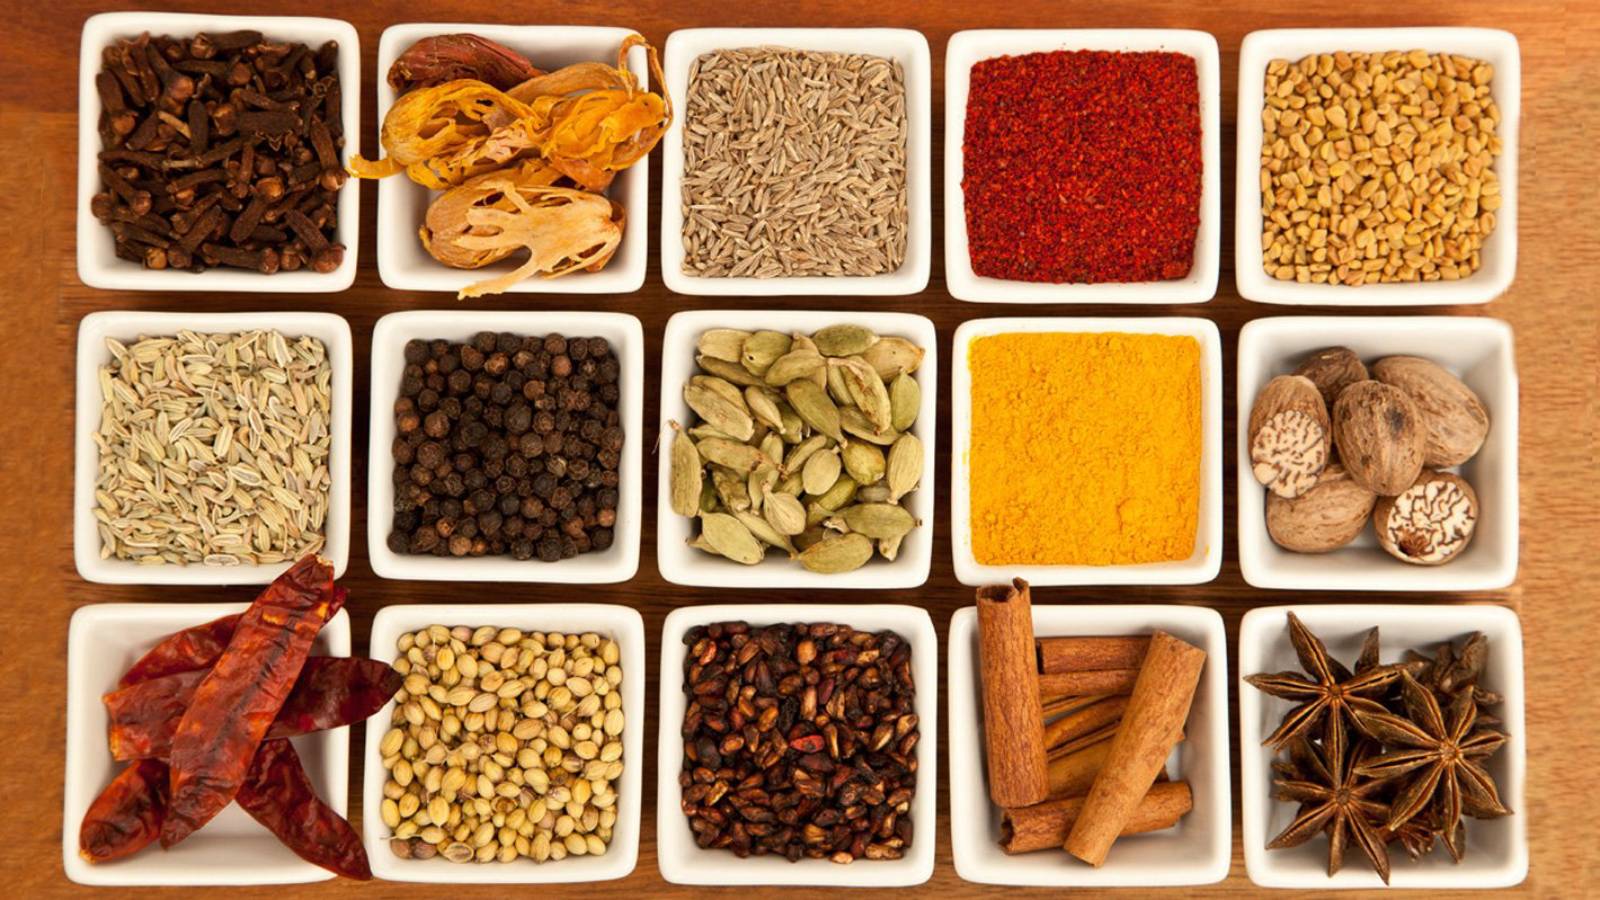 CENTRAL SPICE EXPORT